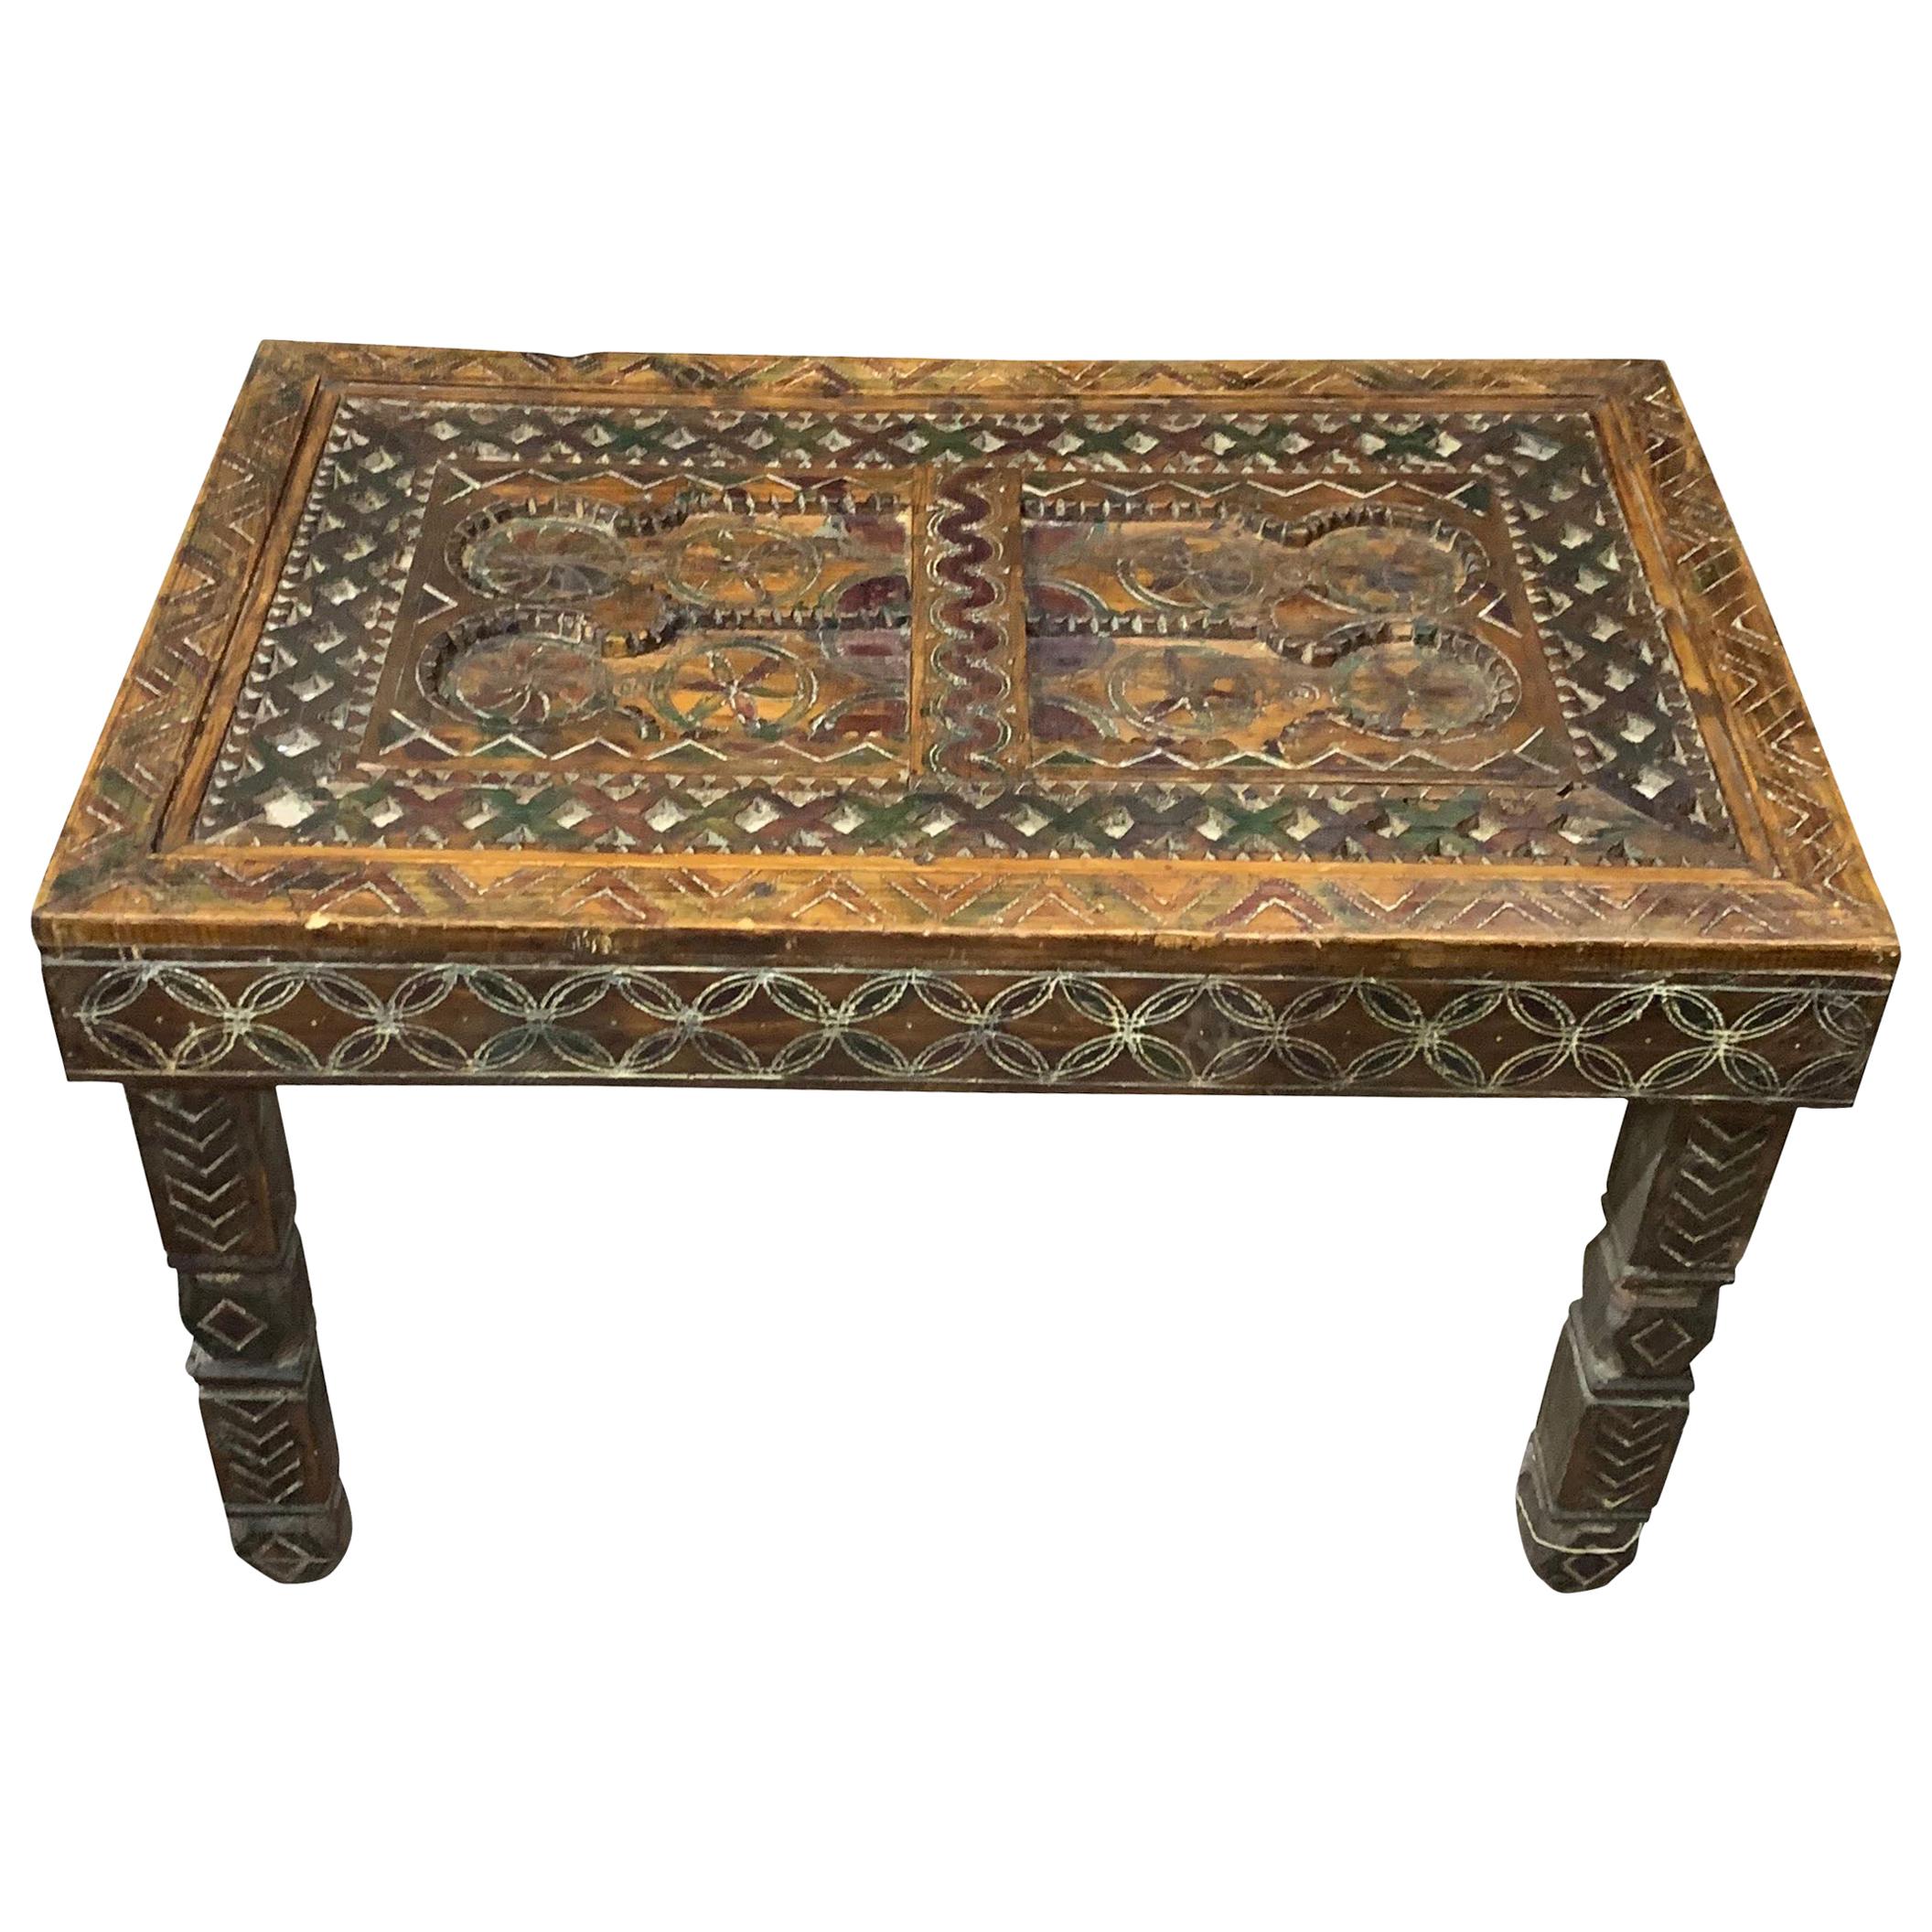 Hand Carved Decorative Wood Coffee Table, Morocco, 19th Century For Sale